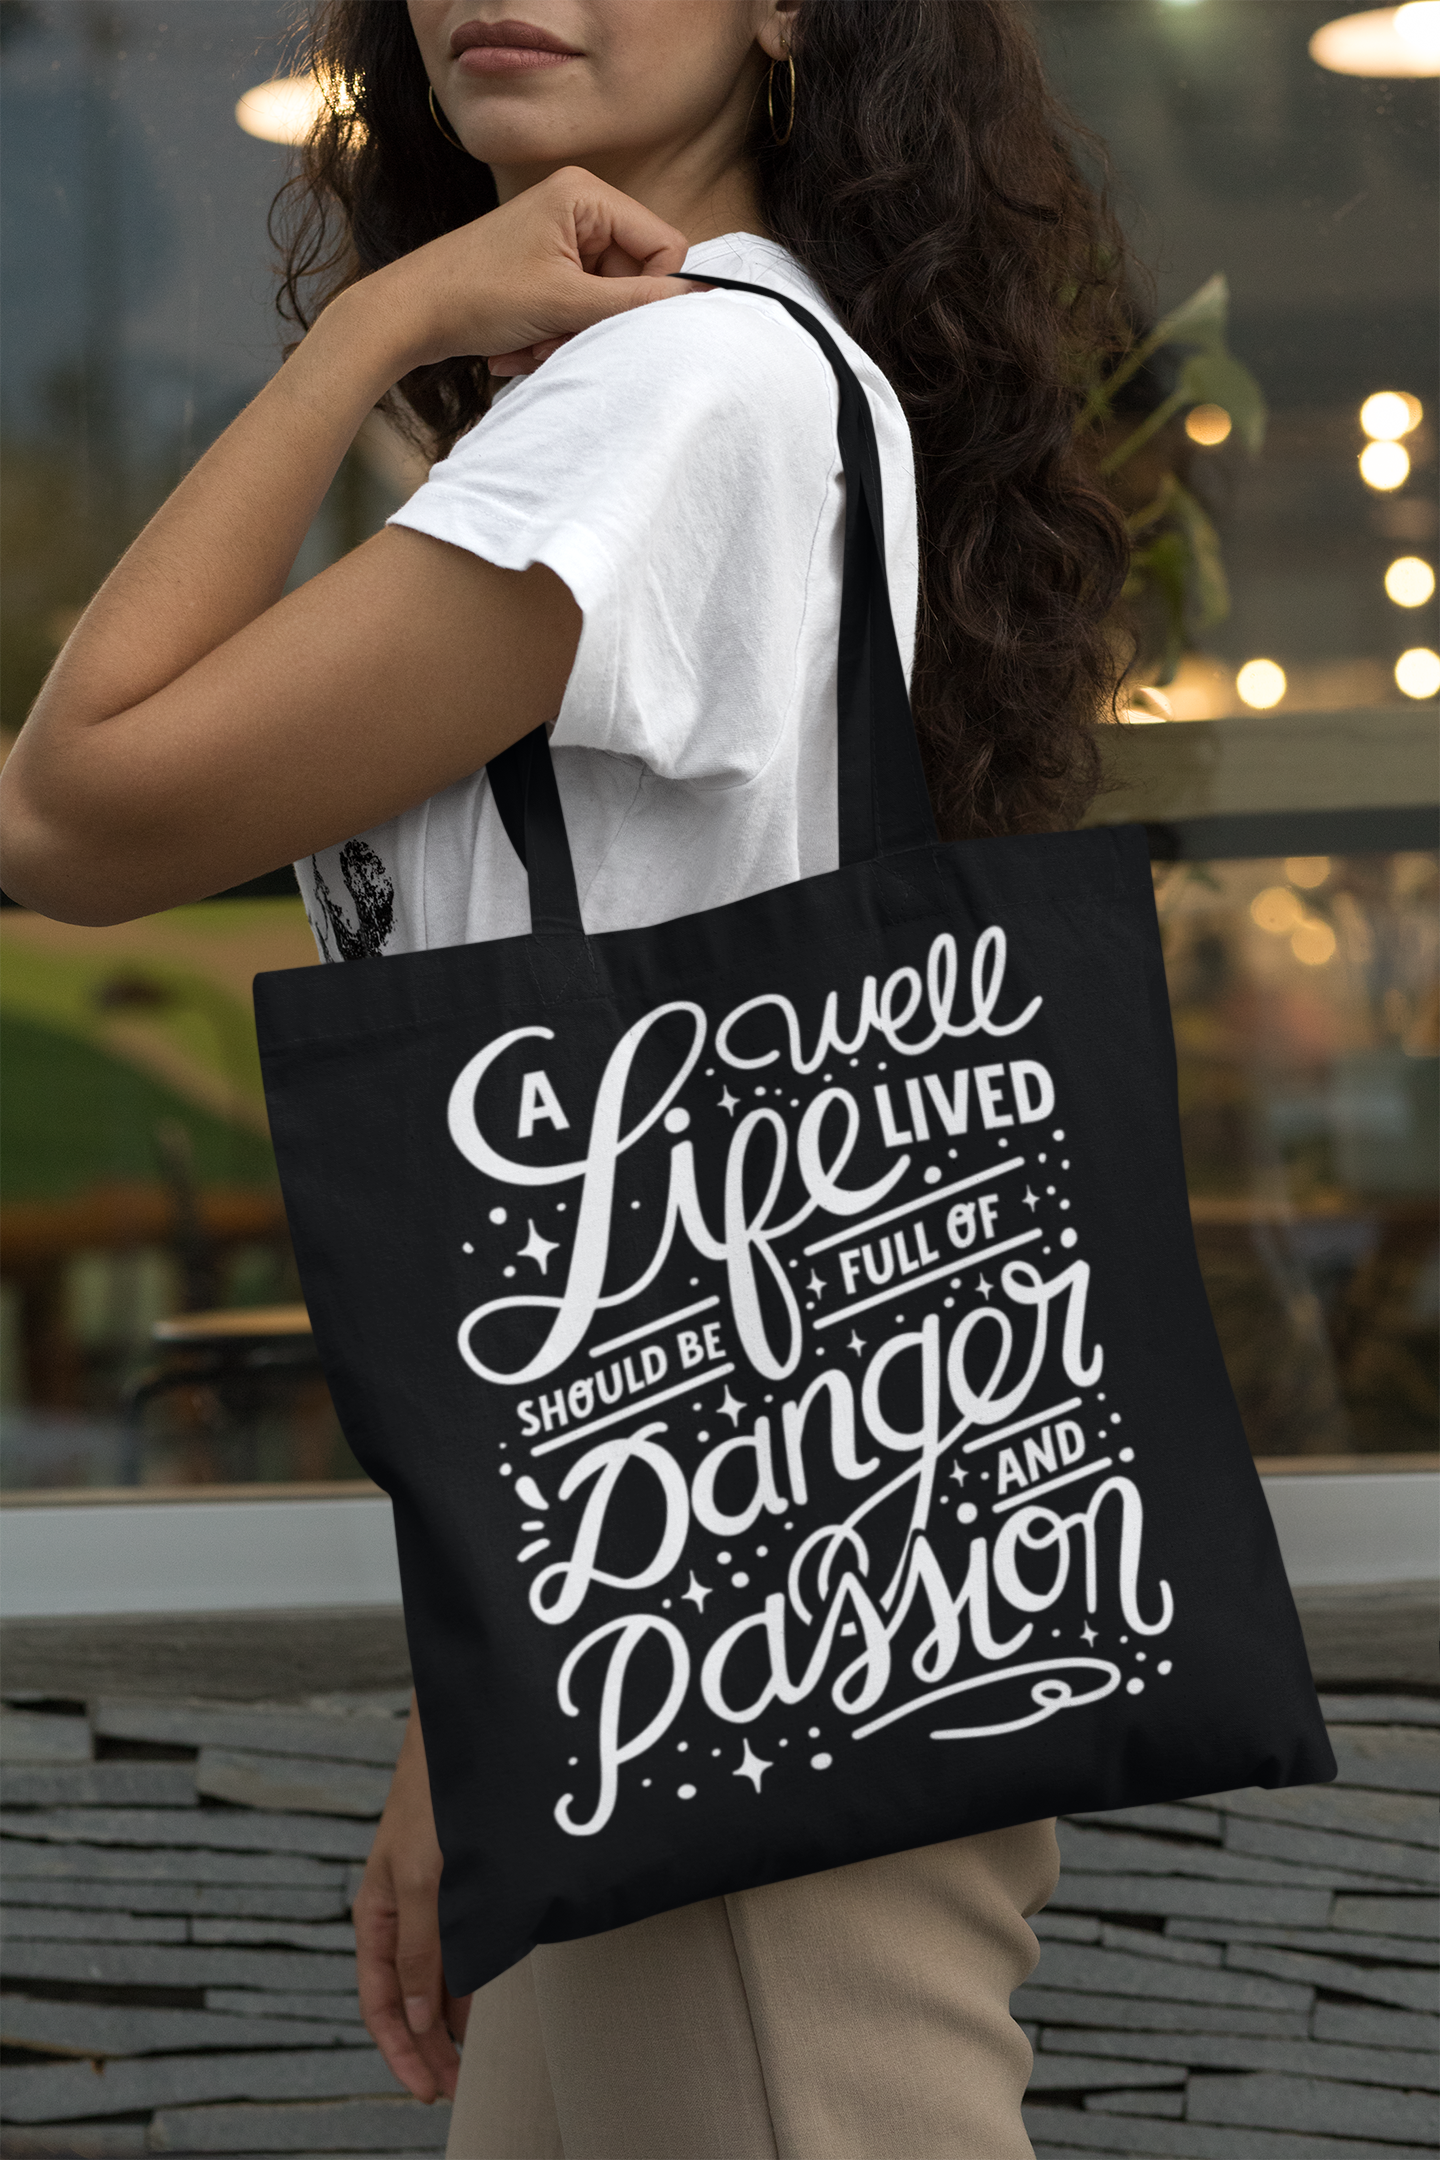 Life well lived - Tote - Official Merchandise Caroline and Susanne Peckham